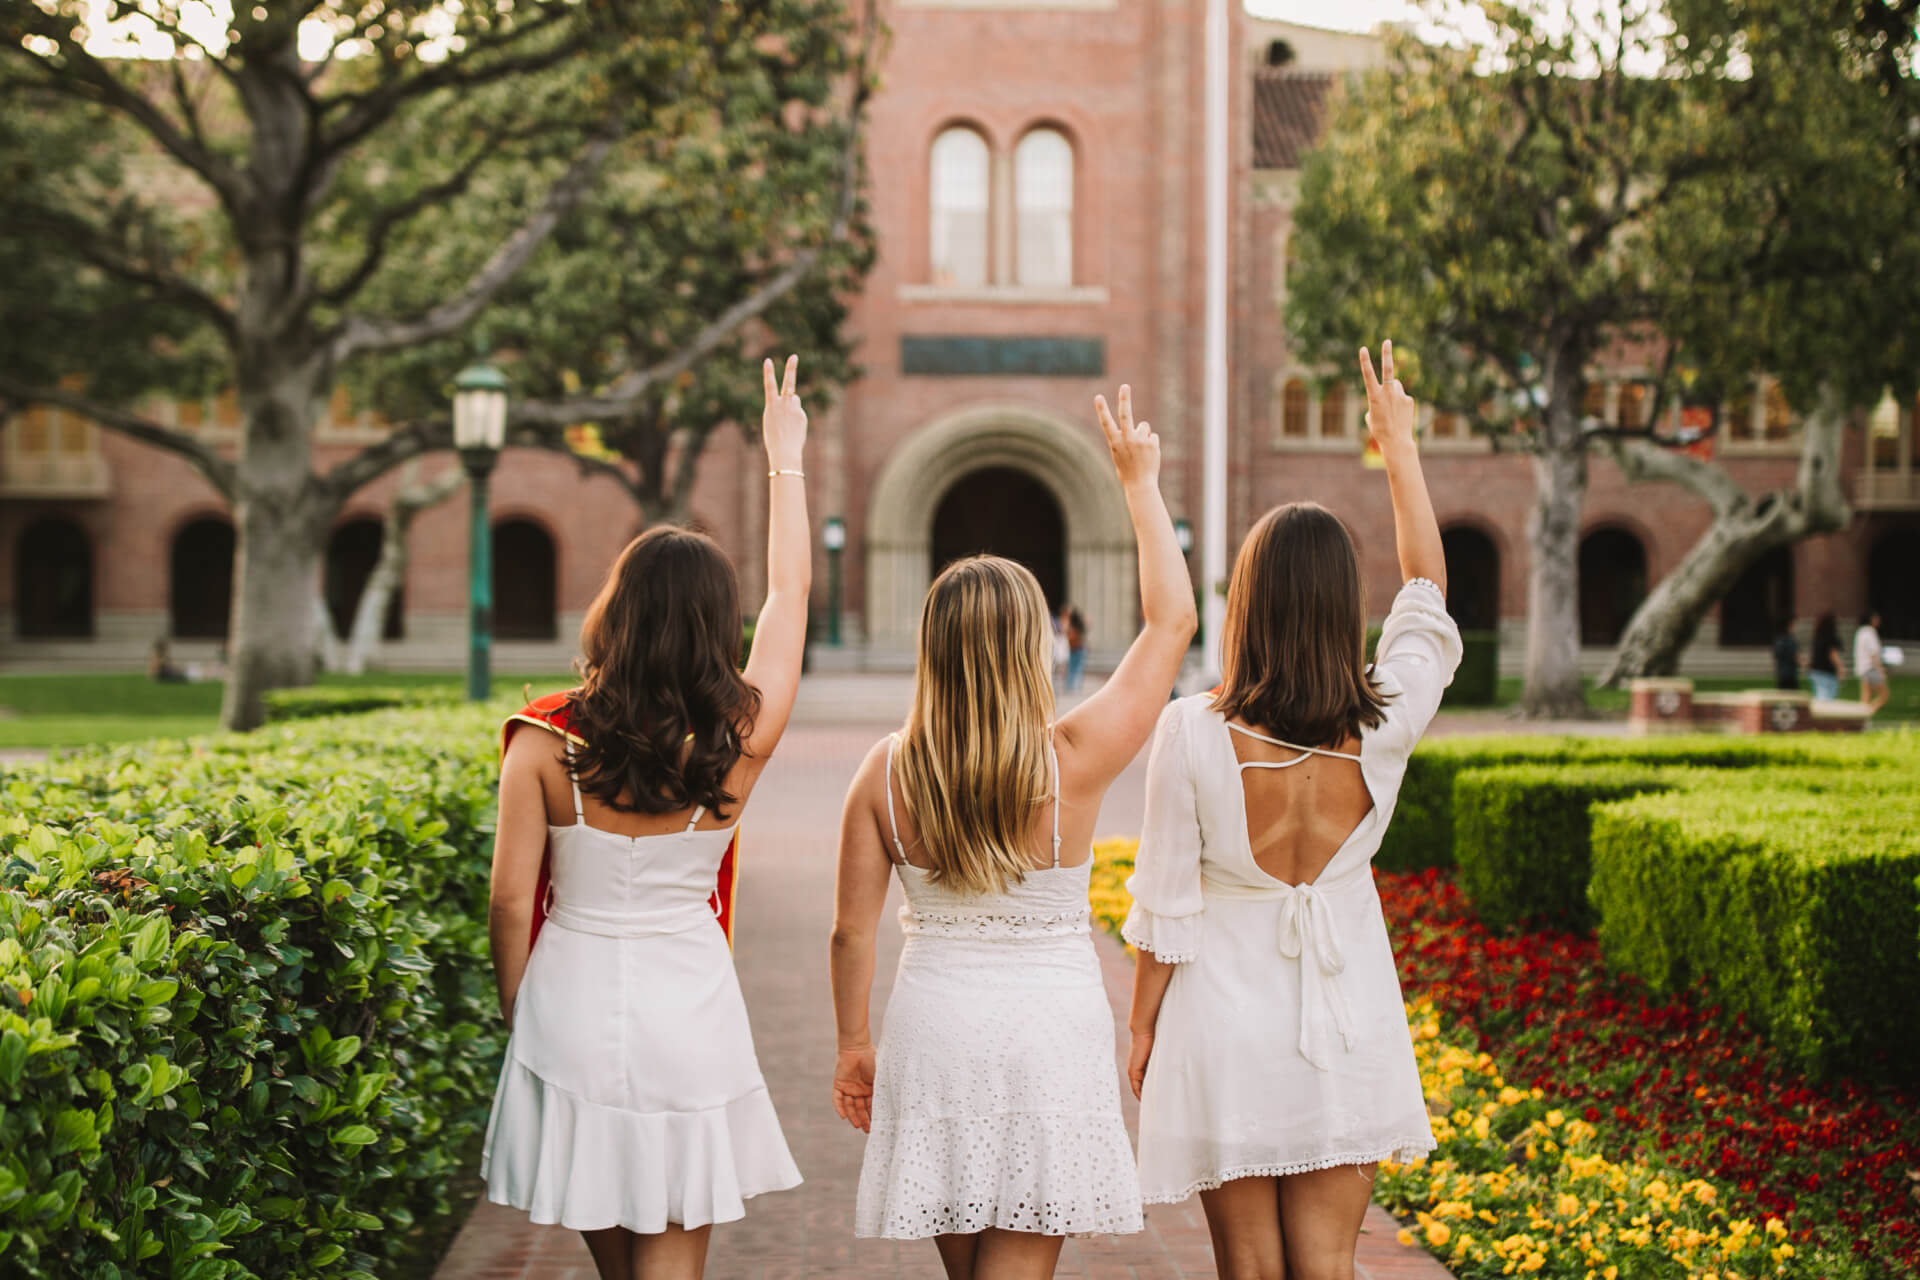 My Three for Why USC